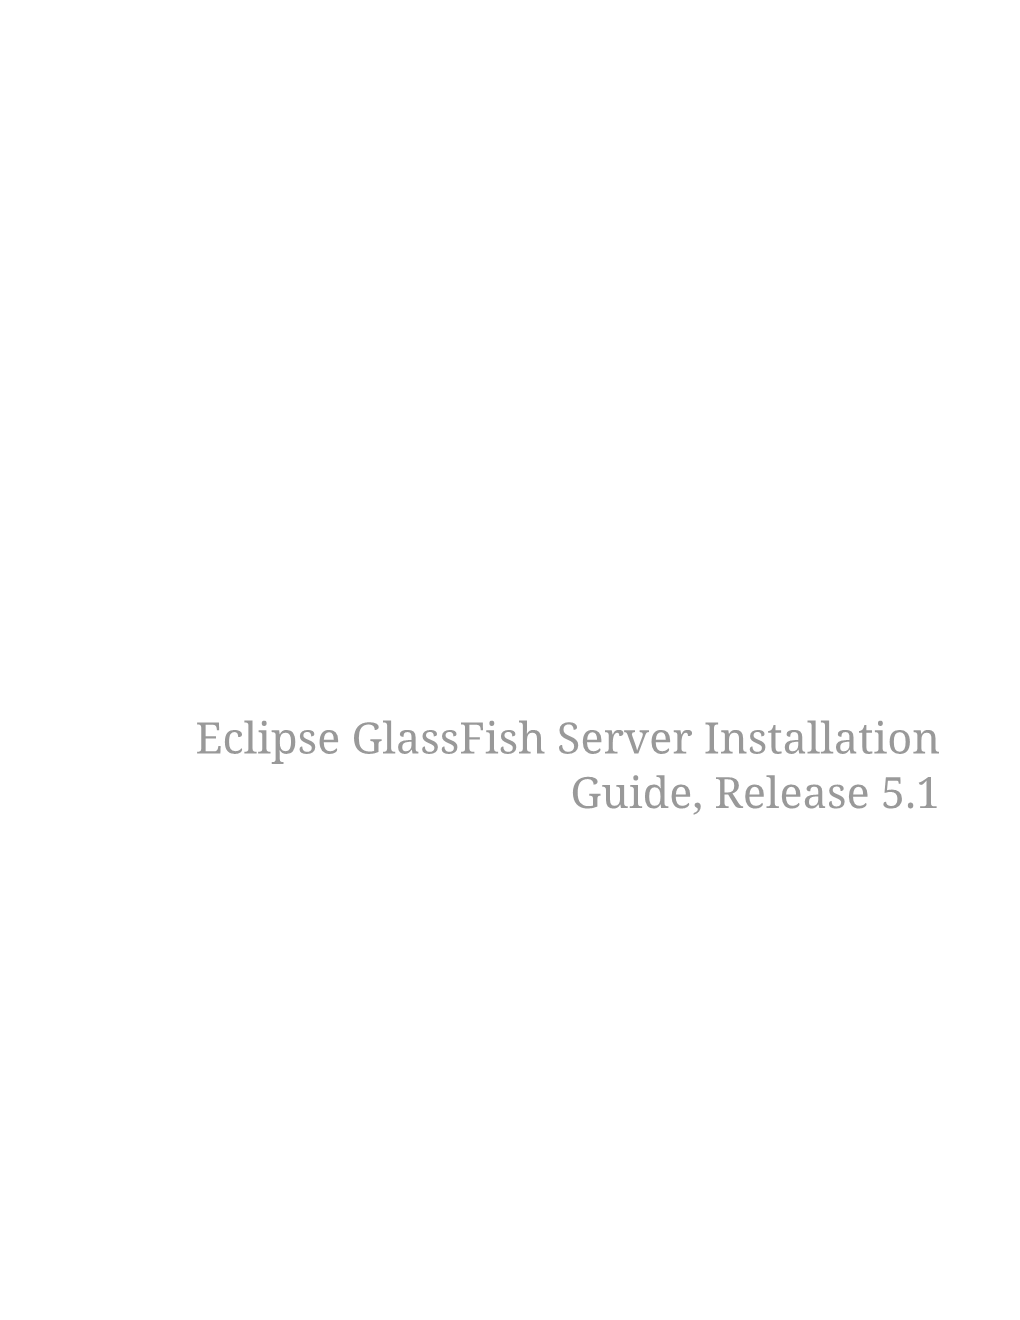 Eclipse Glassfish Server Installation Guide, Release 5.1 Table of Contents